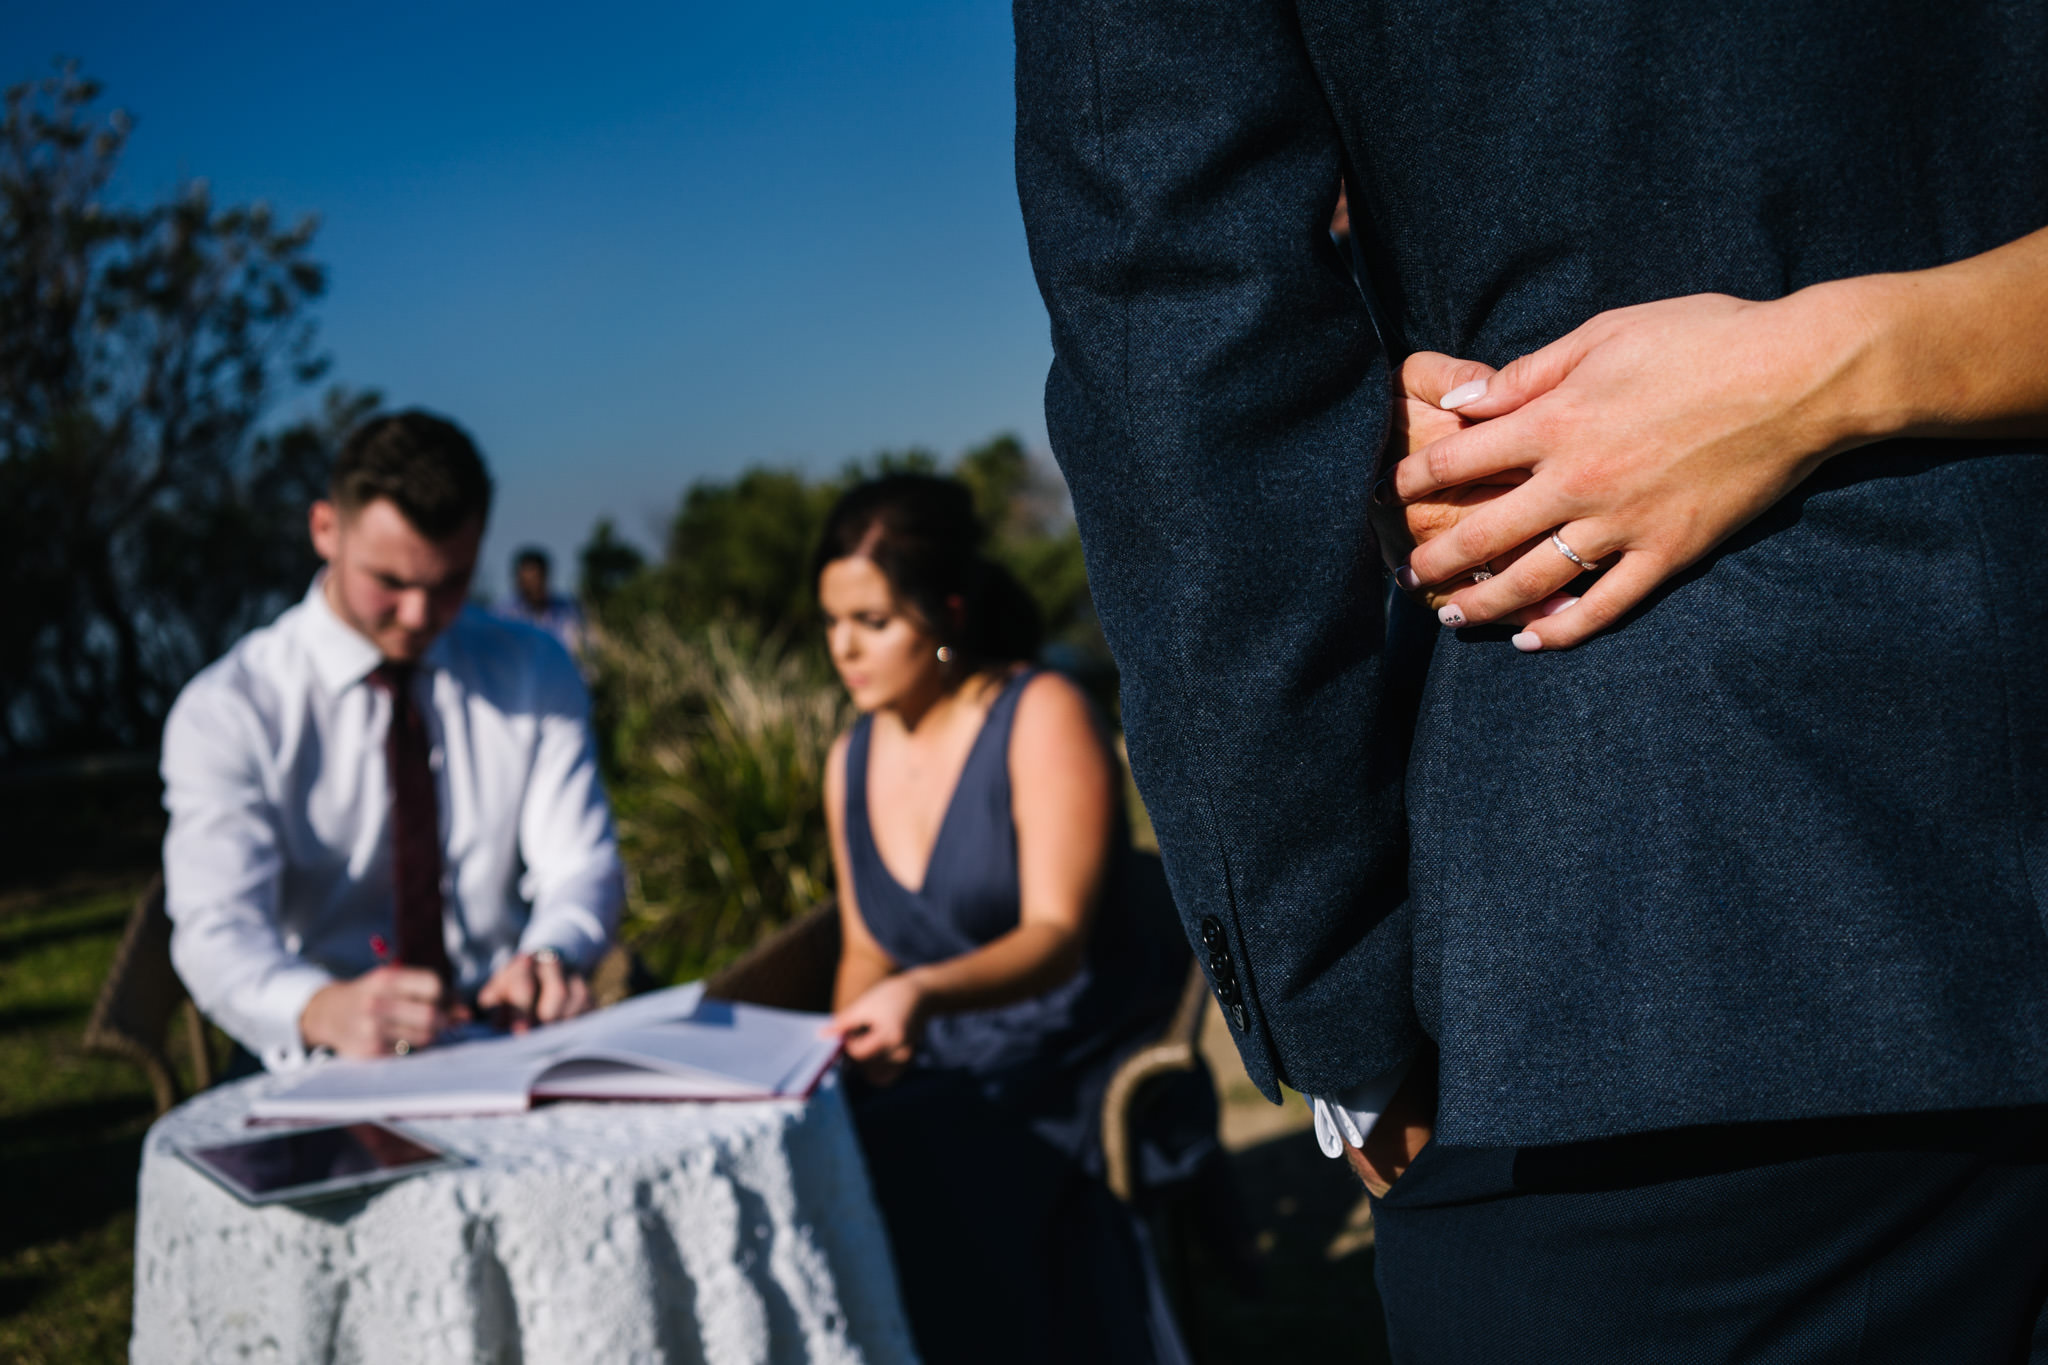 Bride and groom embrace during document signing